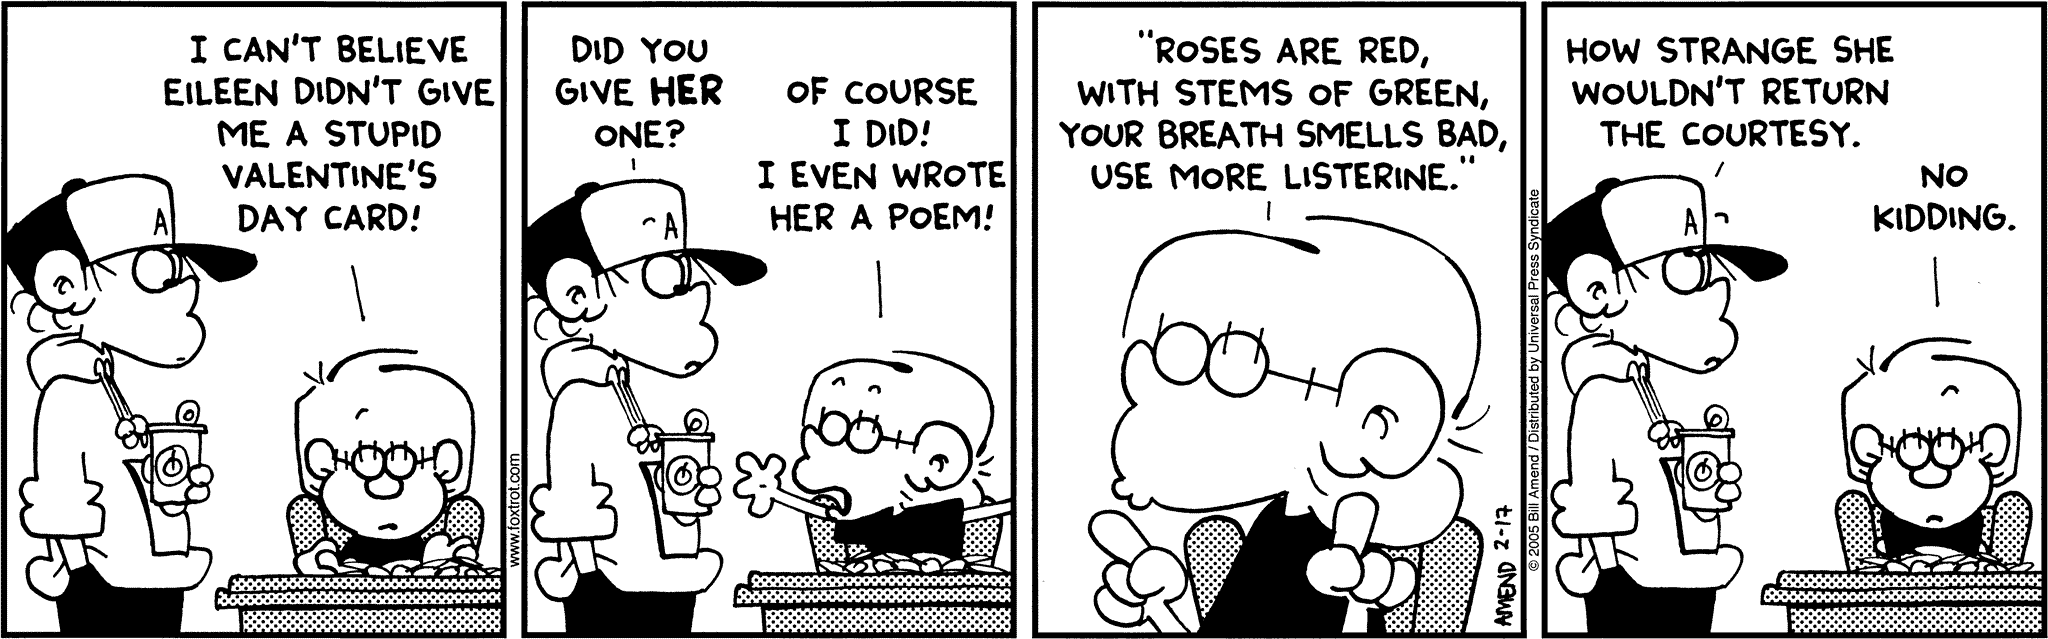 FoxTrot by Bill Amend - Jason: I can't believe Eileen didn't give me a stupid Valentine's Day card! Peter: Did you give her one? Jason: Of course I did! I even wrote her a poem! Jason: "Roses are red, with stems of green, your breath smells bad, use more listerine." Peter: How strange she would return the courtesy. Jason: No kidding.